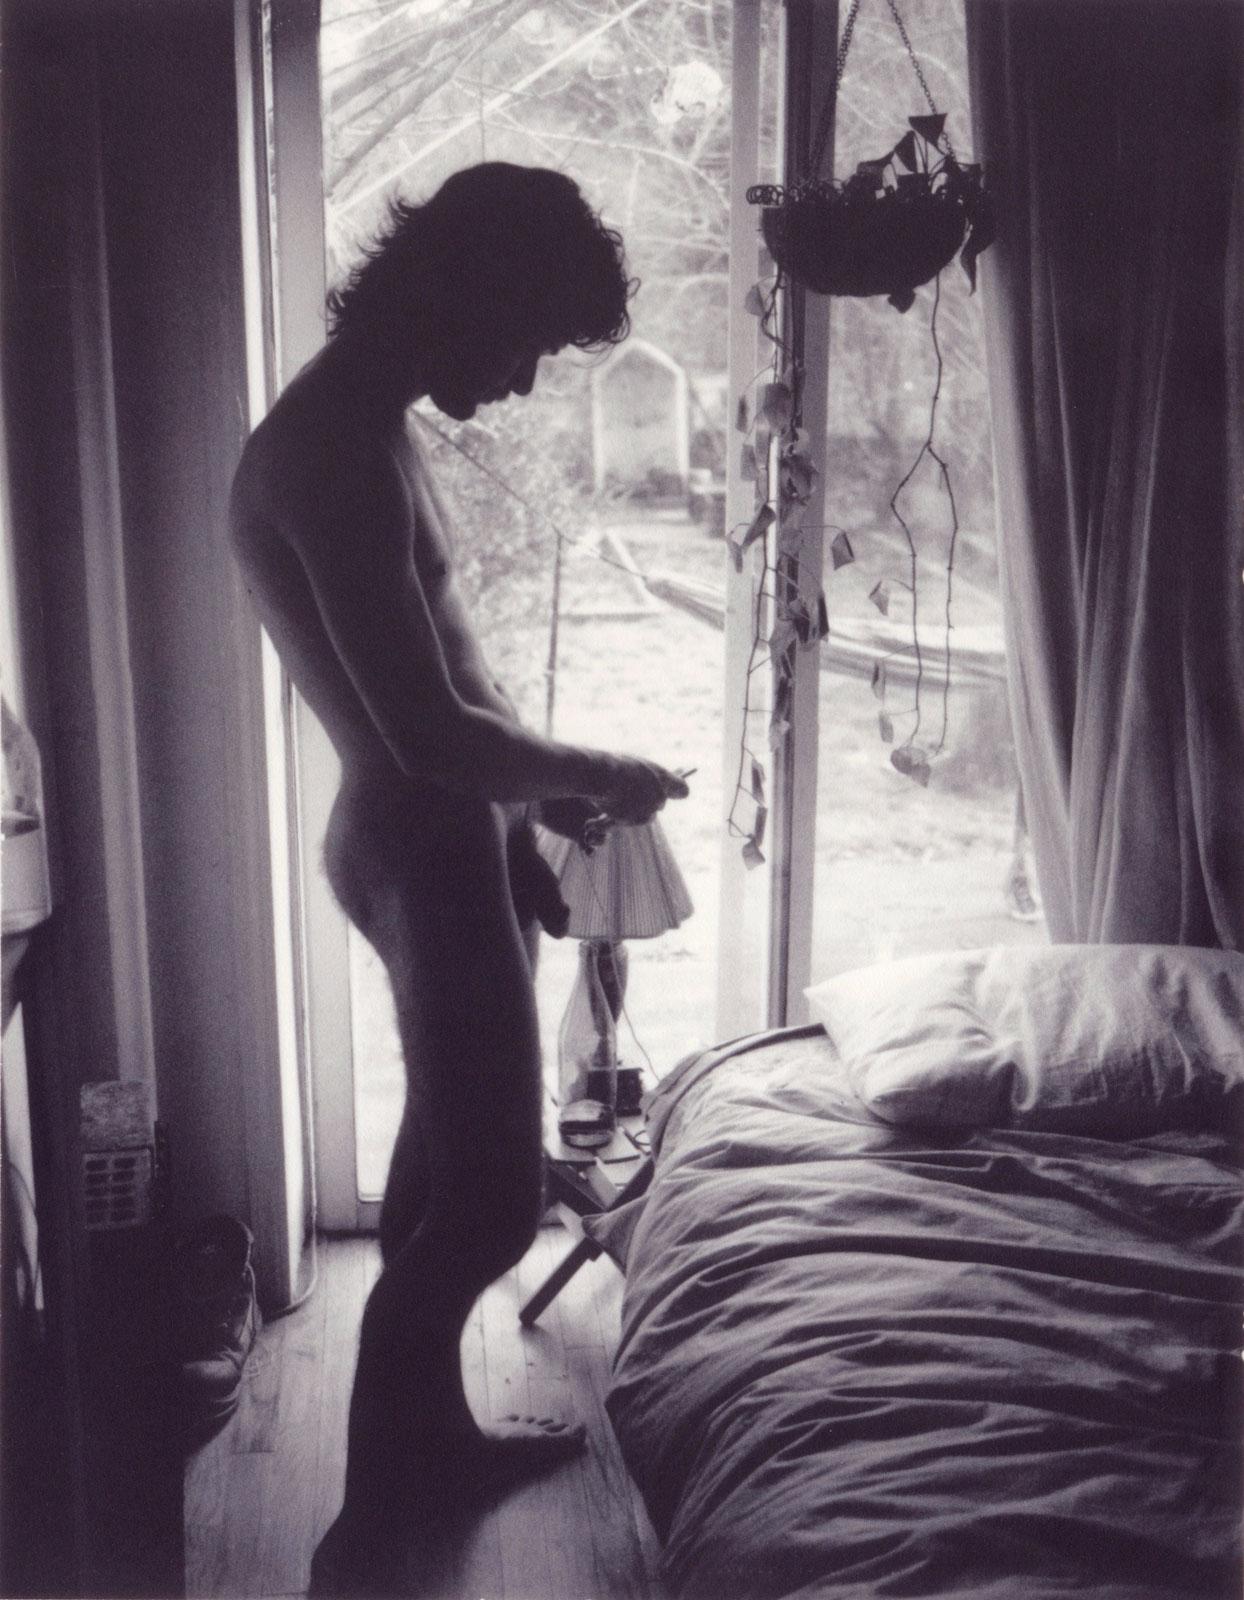 Sebastian Perinotti Nude Photograph - Tanner's Room in Greenpoint (Young, hung nude man checks iPhone by unmade bed)